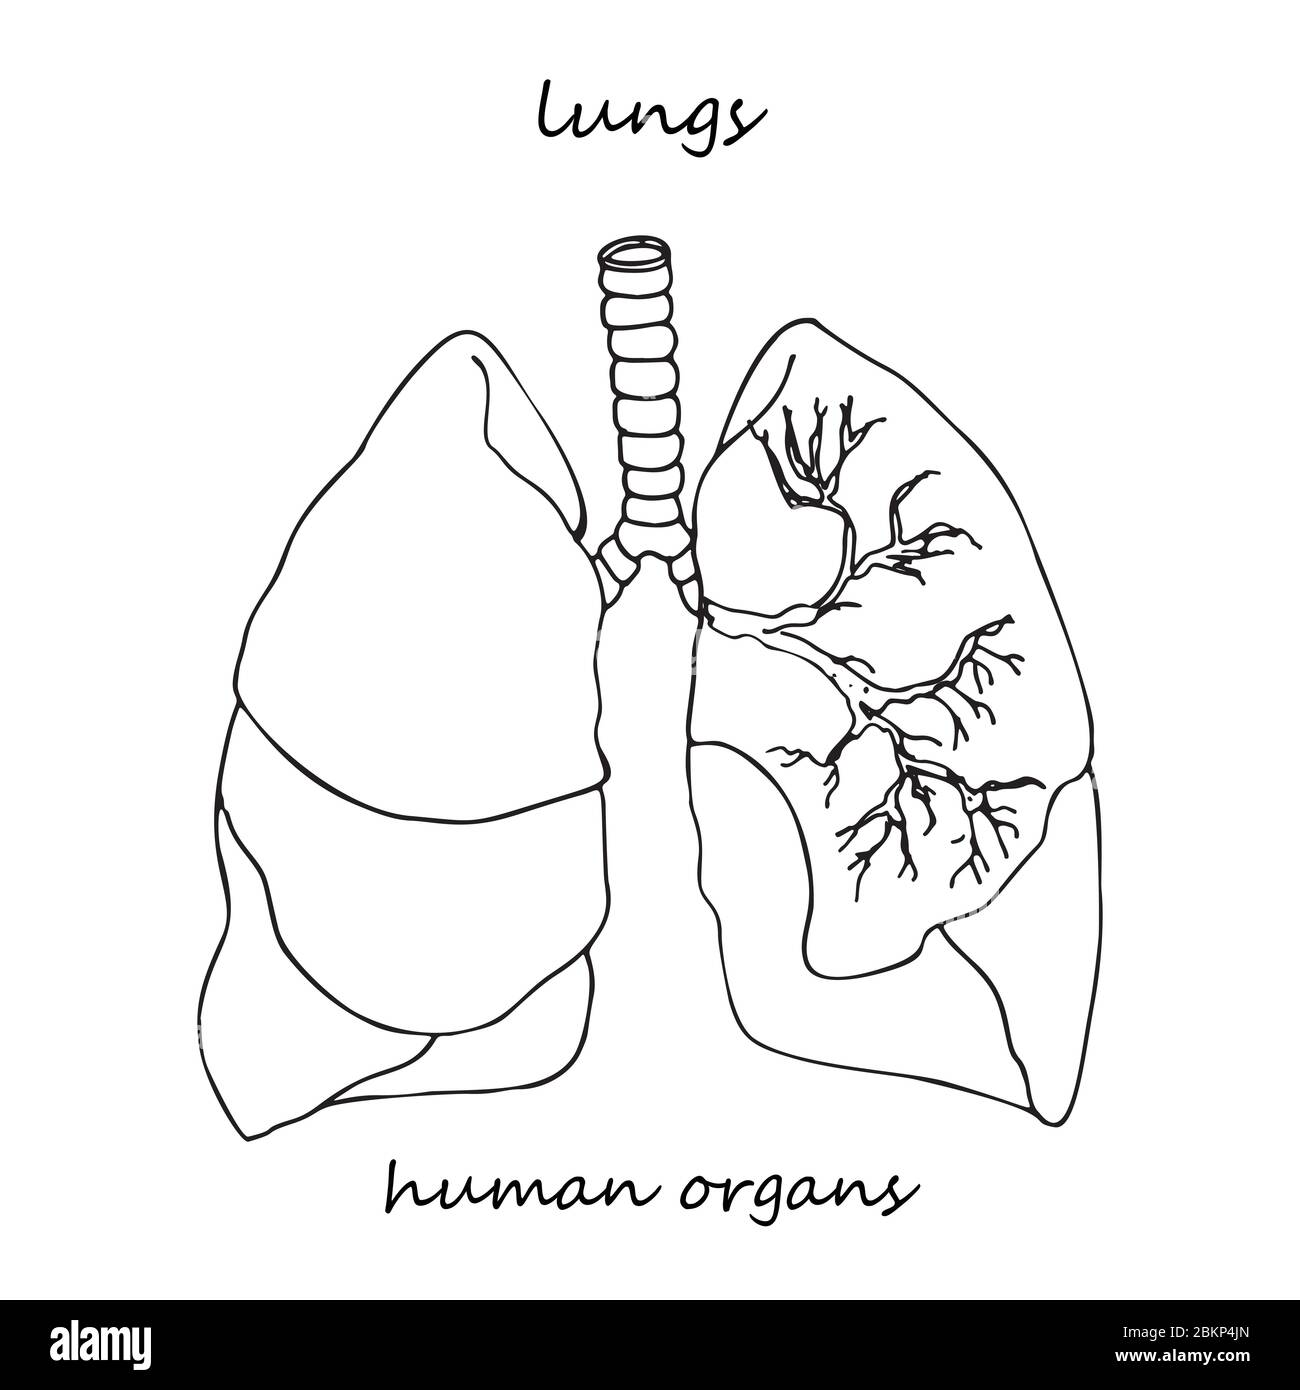 315 Lungs draw Vector Images  Depositphotos